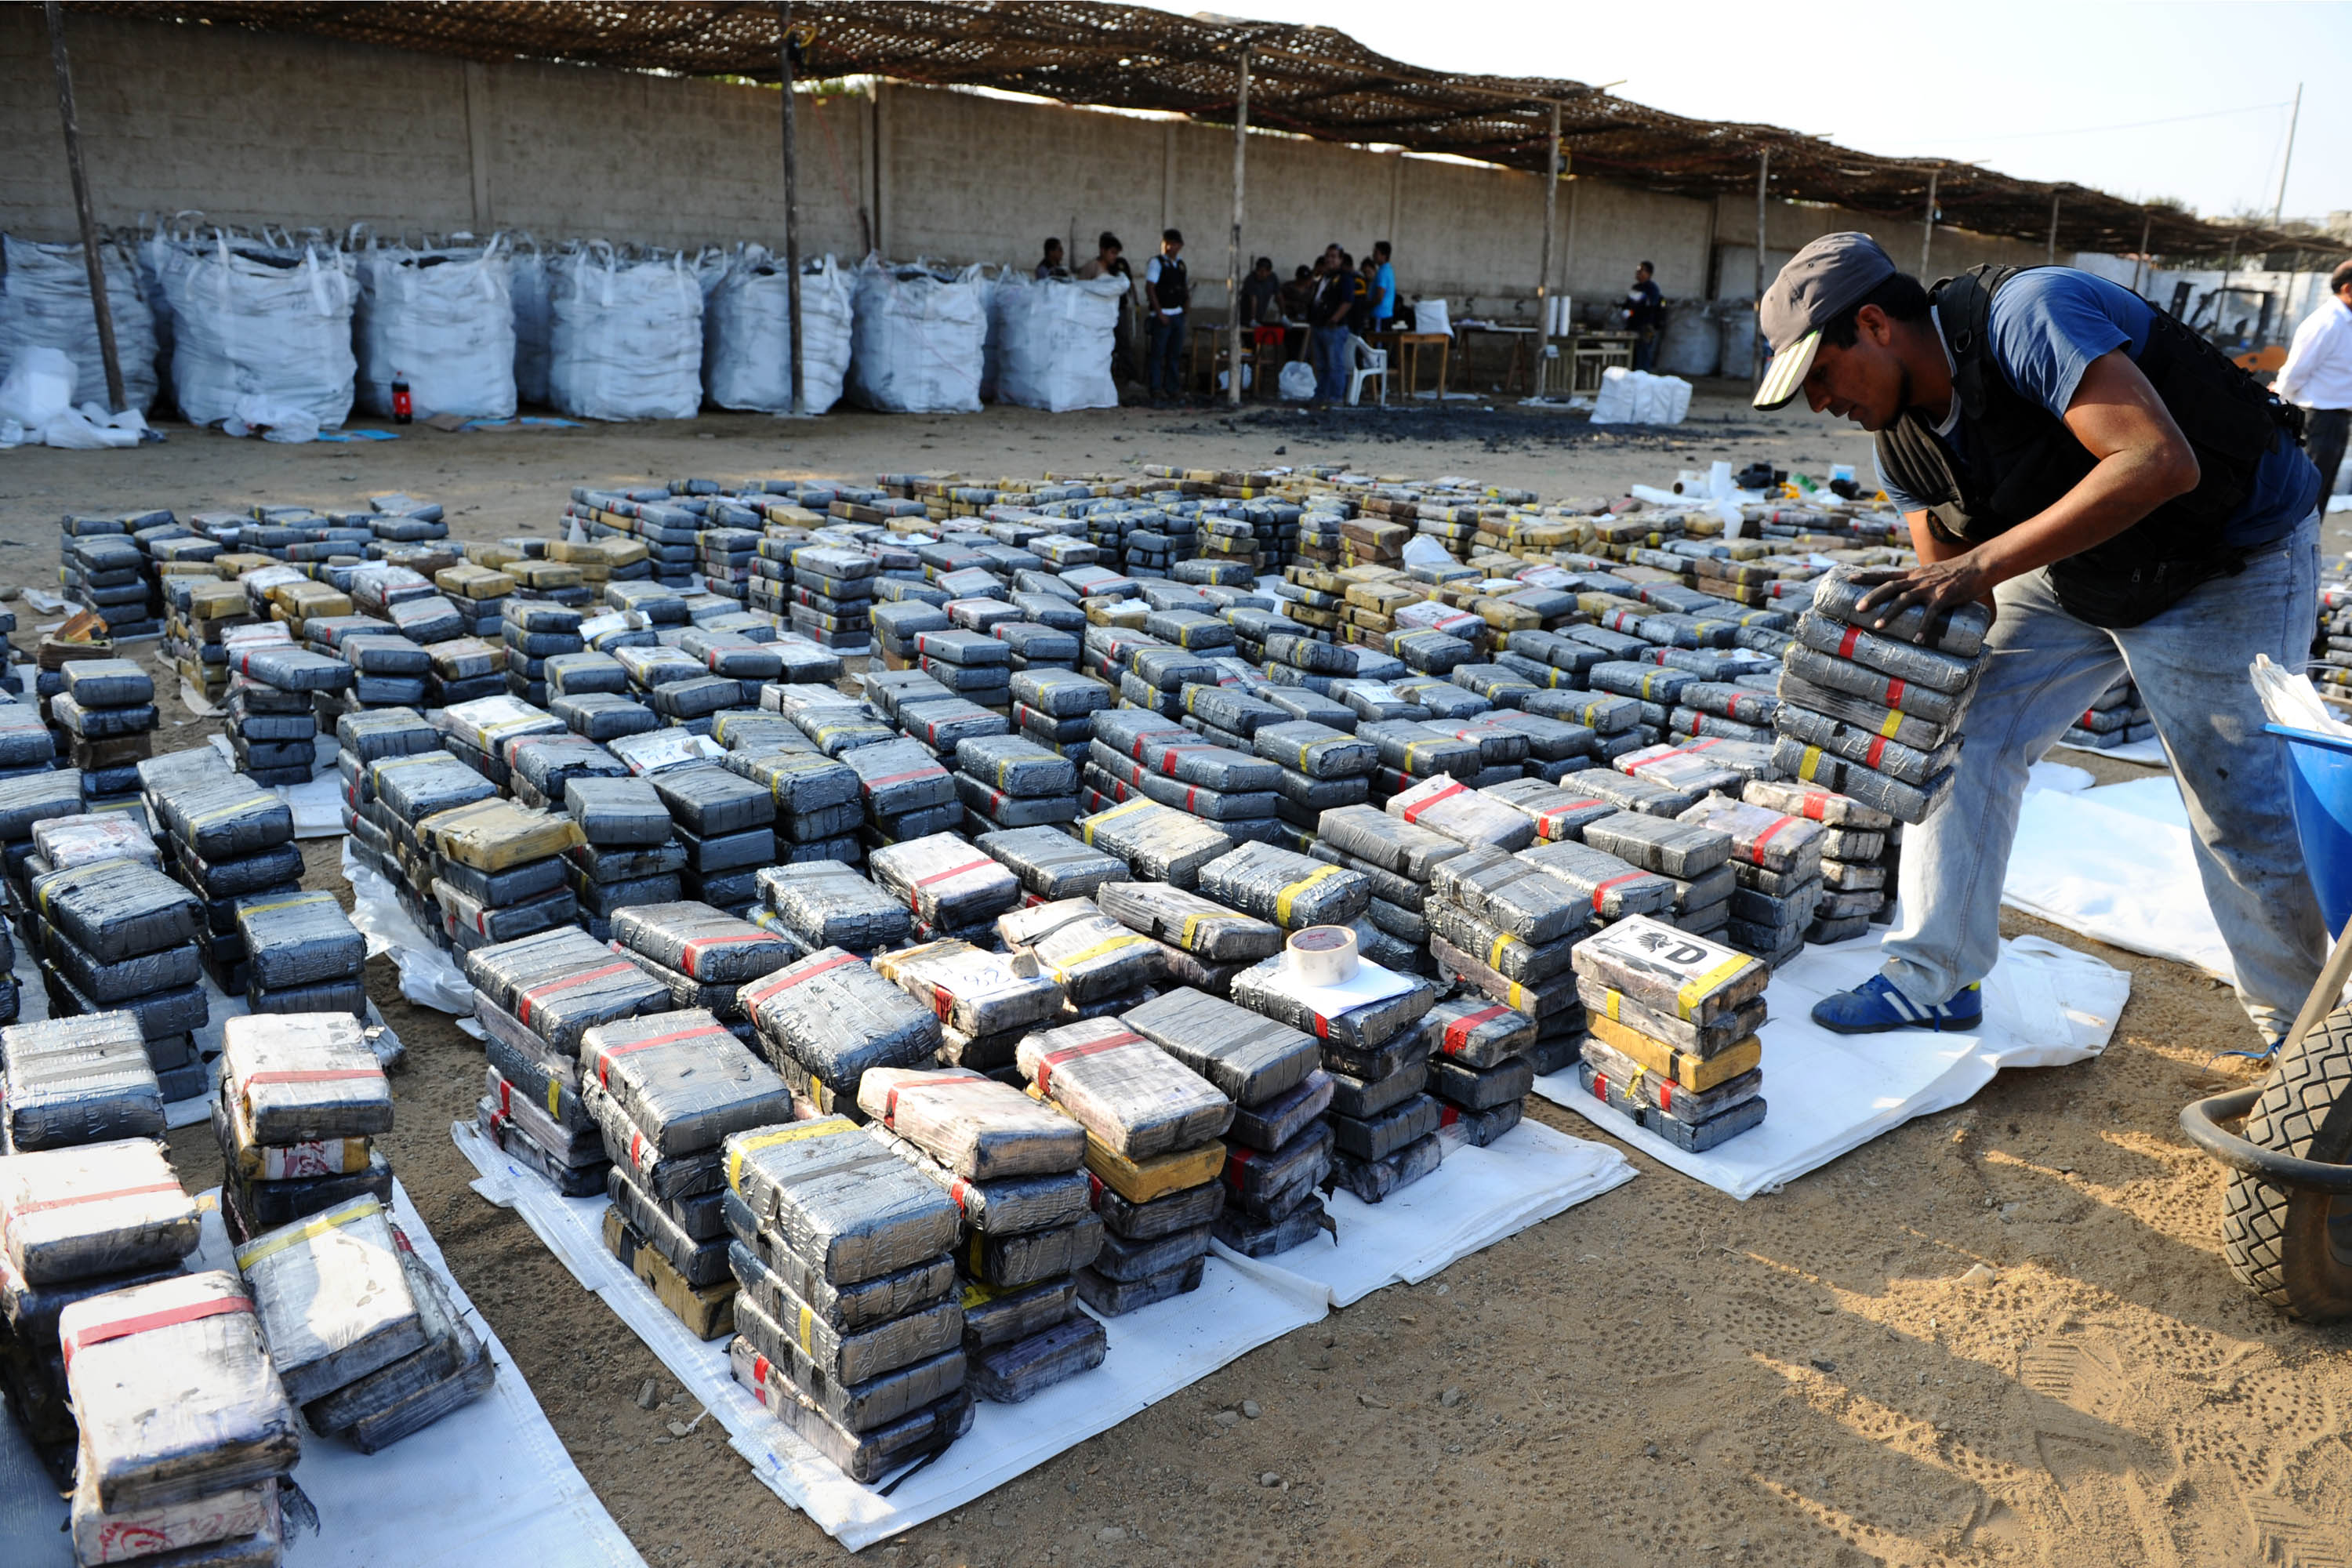 The cocaine seized in Huanchaco, Peru